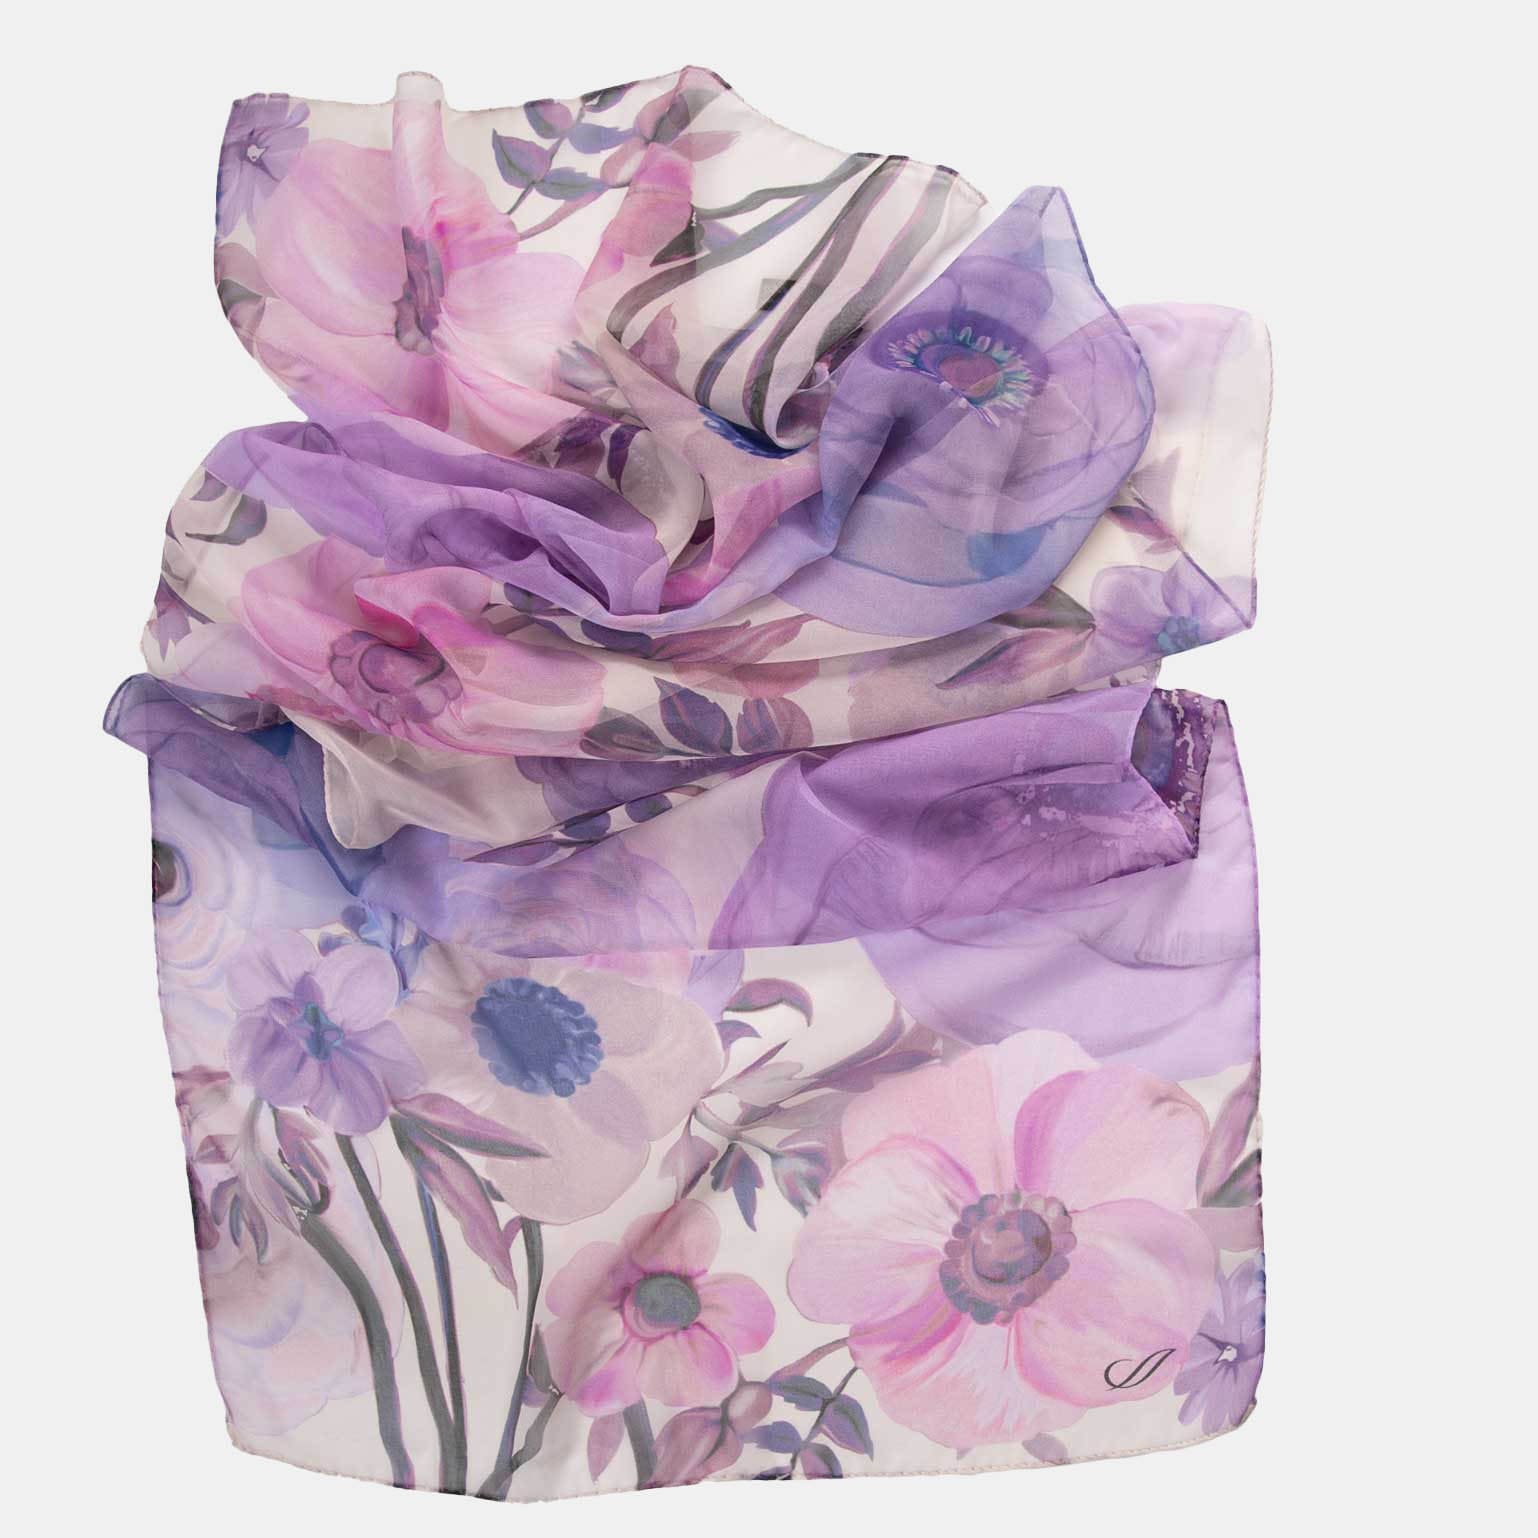 100% Silk Scarf in Black / Super Soft and Lightweight / Spring Summer  Collection